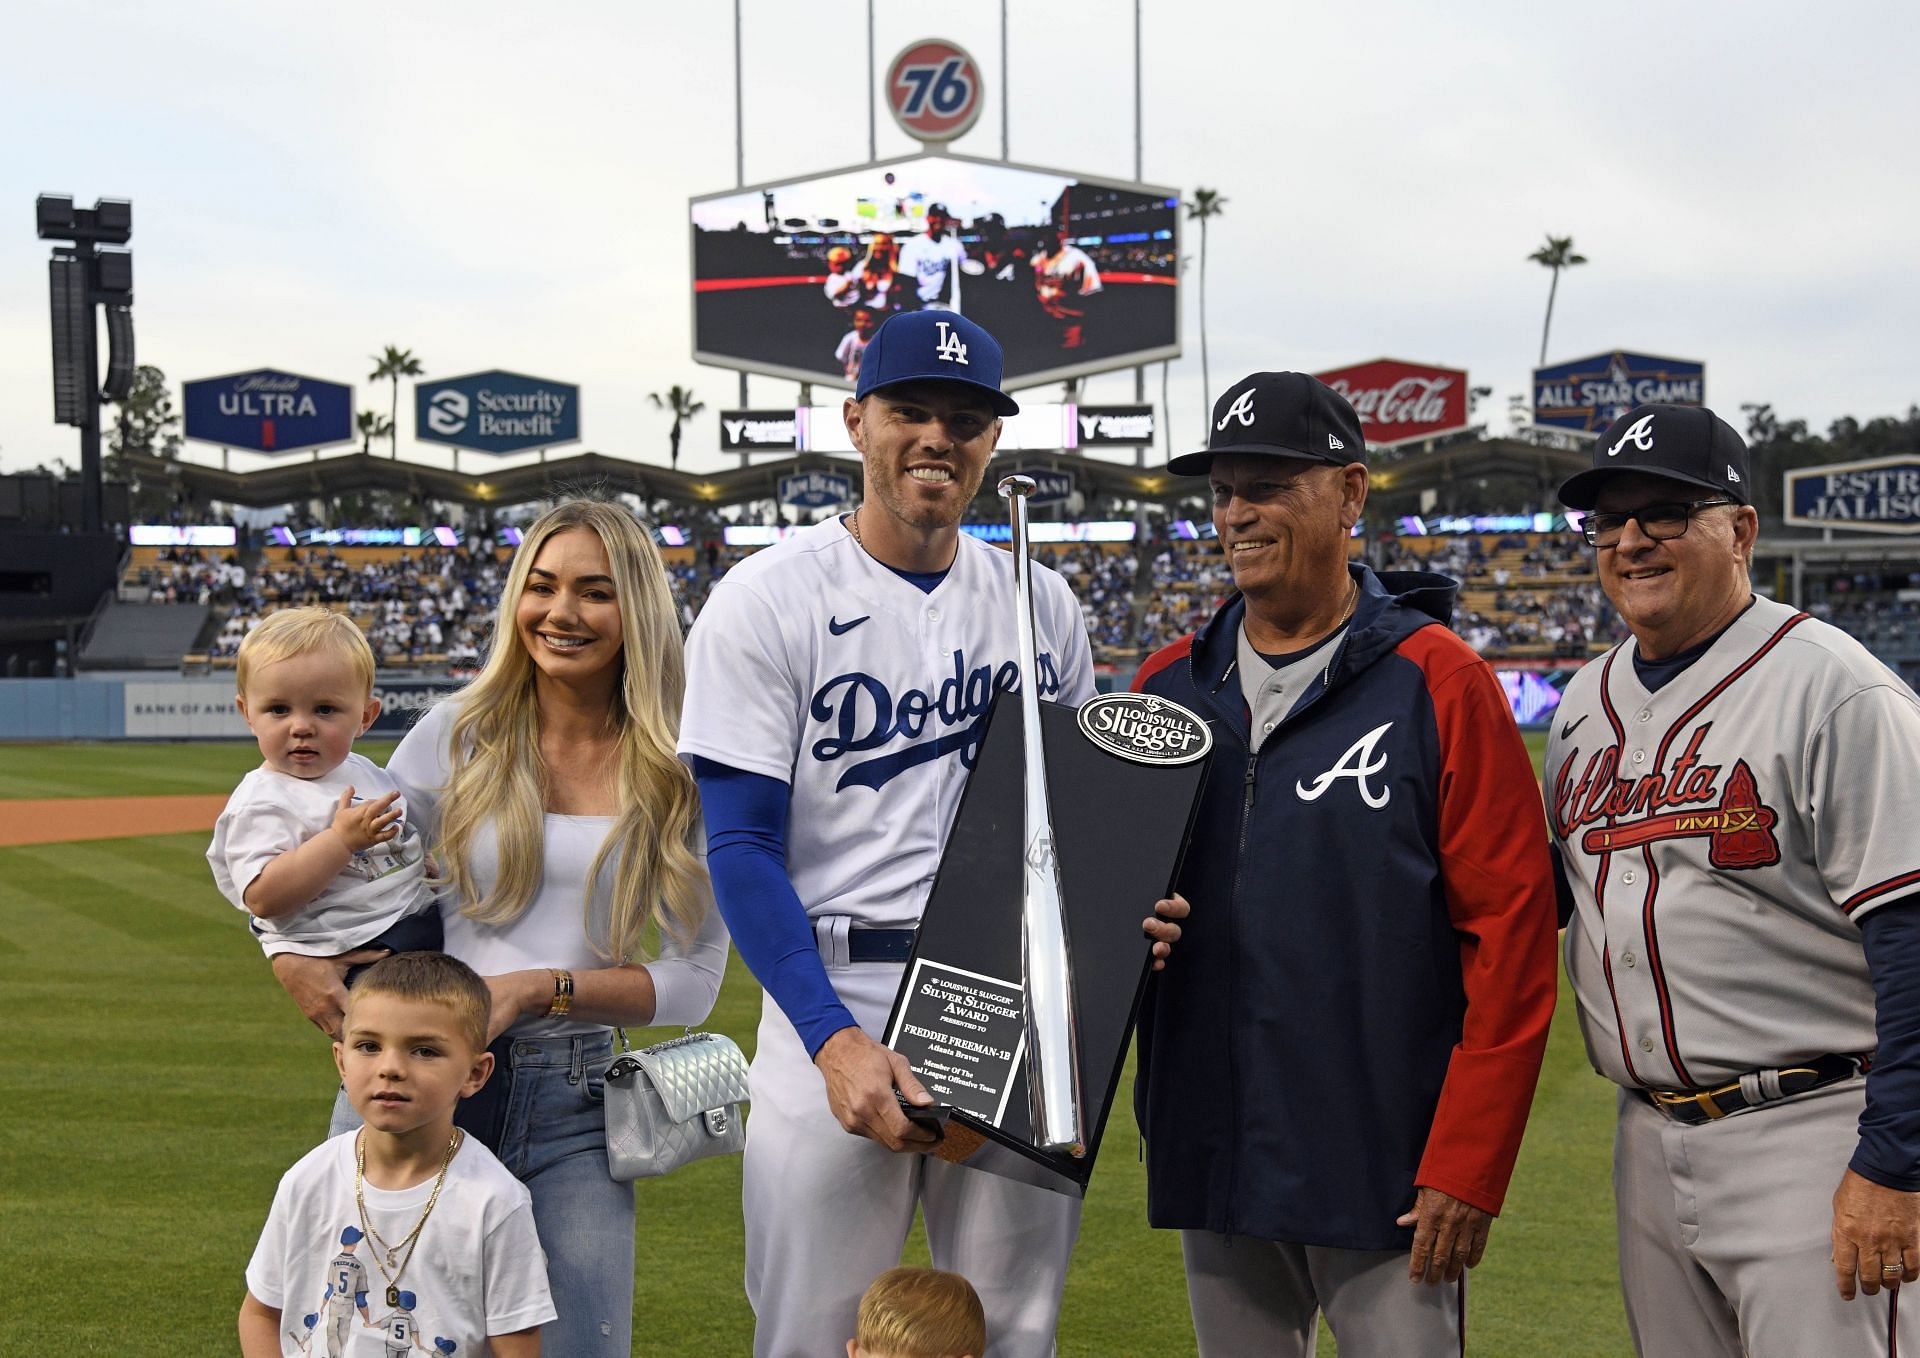 Los Angeles Dodgers star receiving an accolade earned while with the Braves